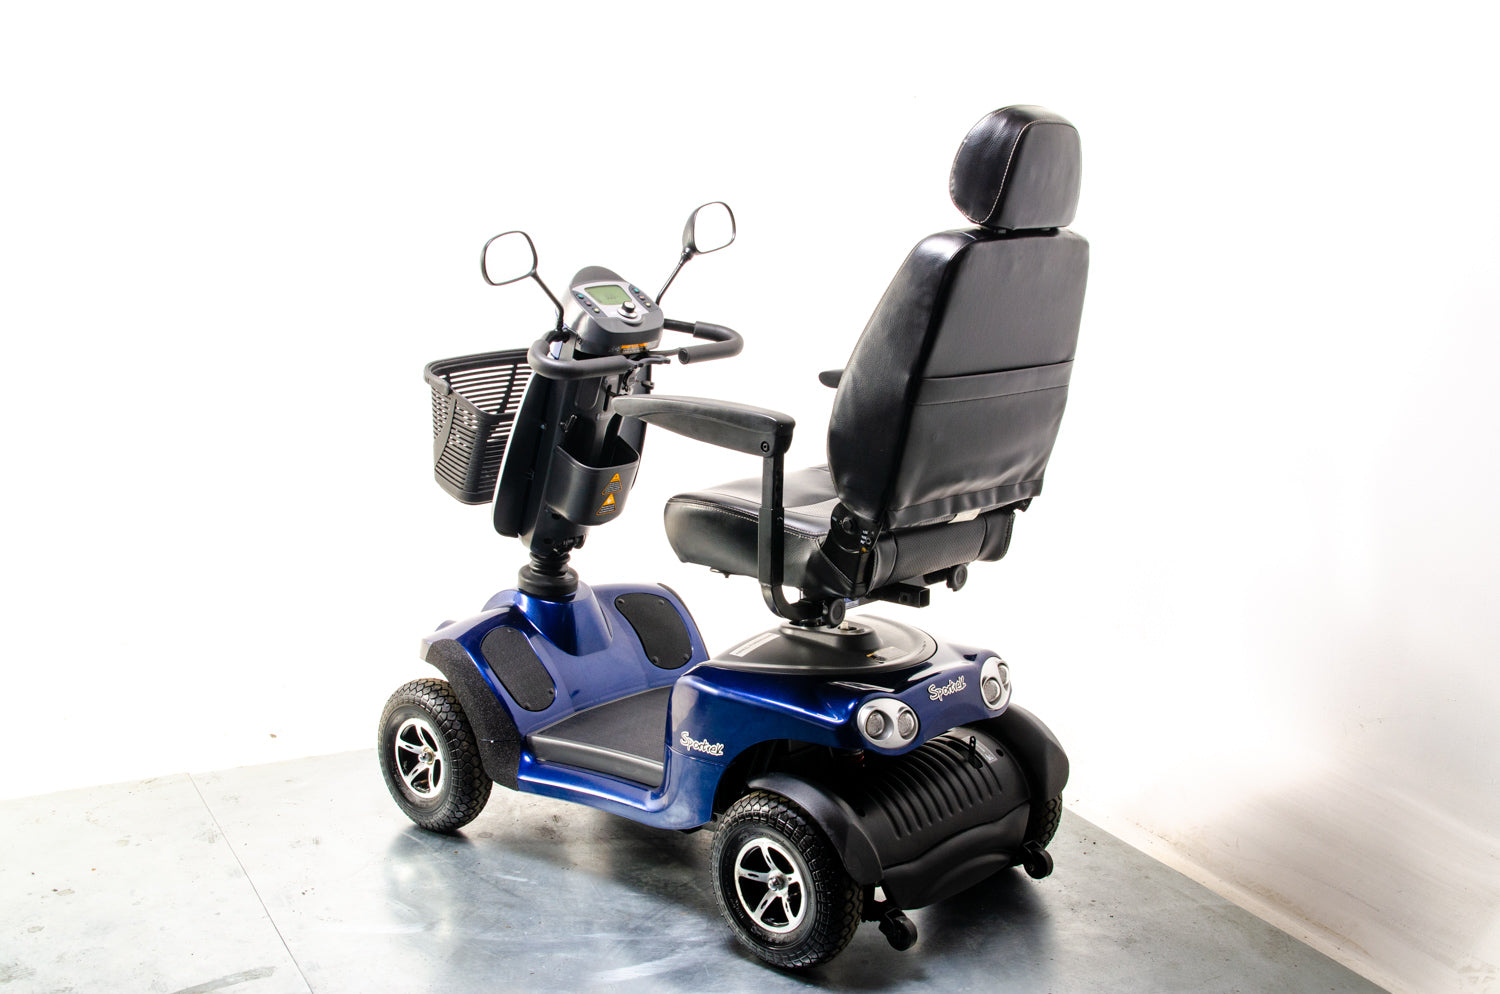 Excel Sportrek Used Off-Road Mobility Scooter 8mph Road Pneumatic Van Os Midsize Pavement 13368